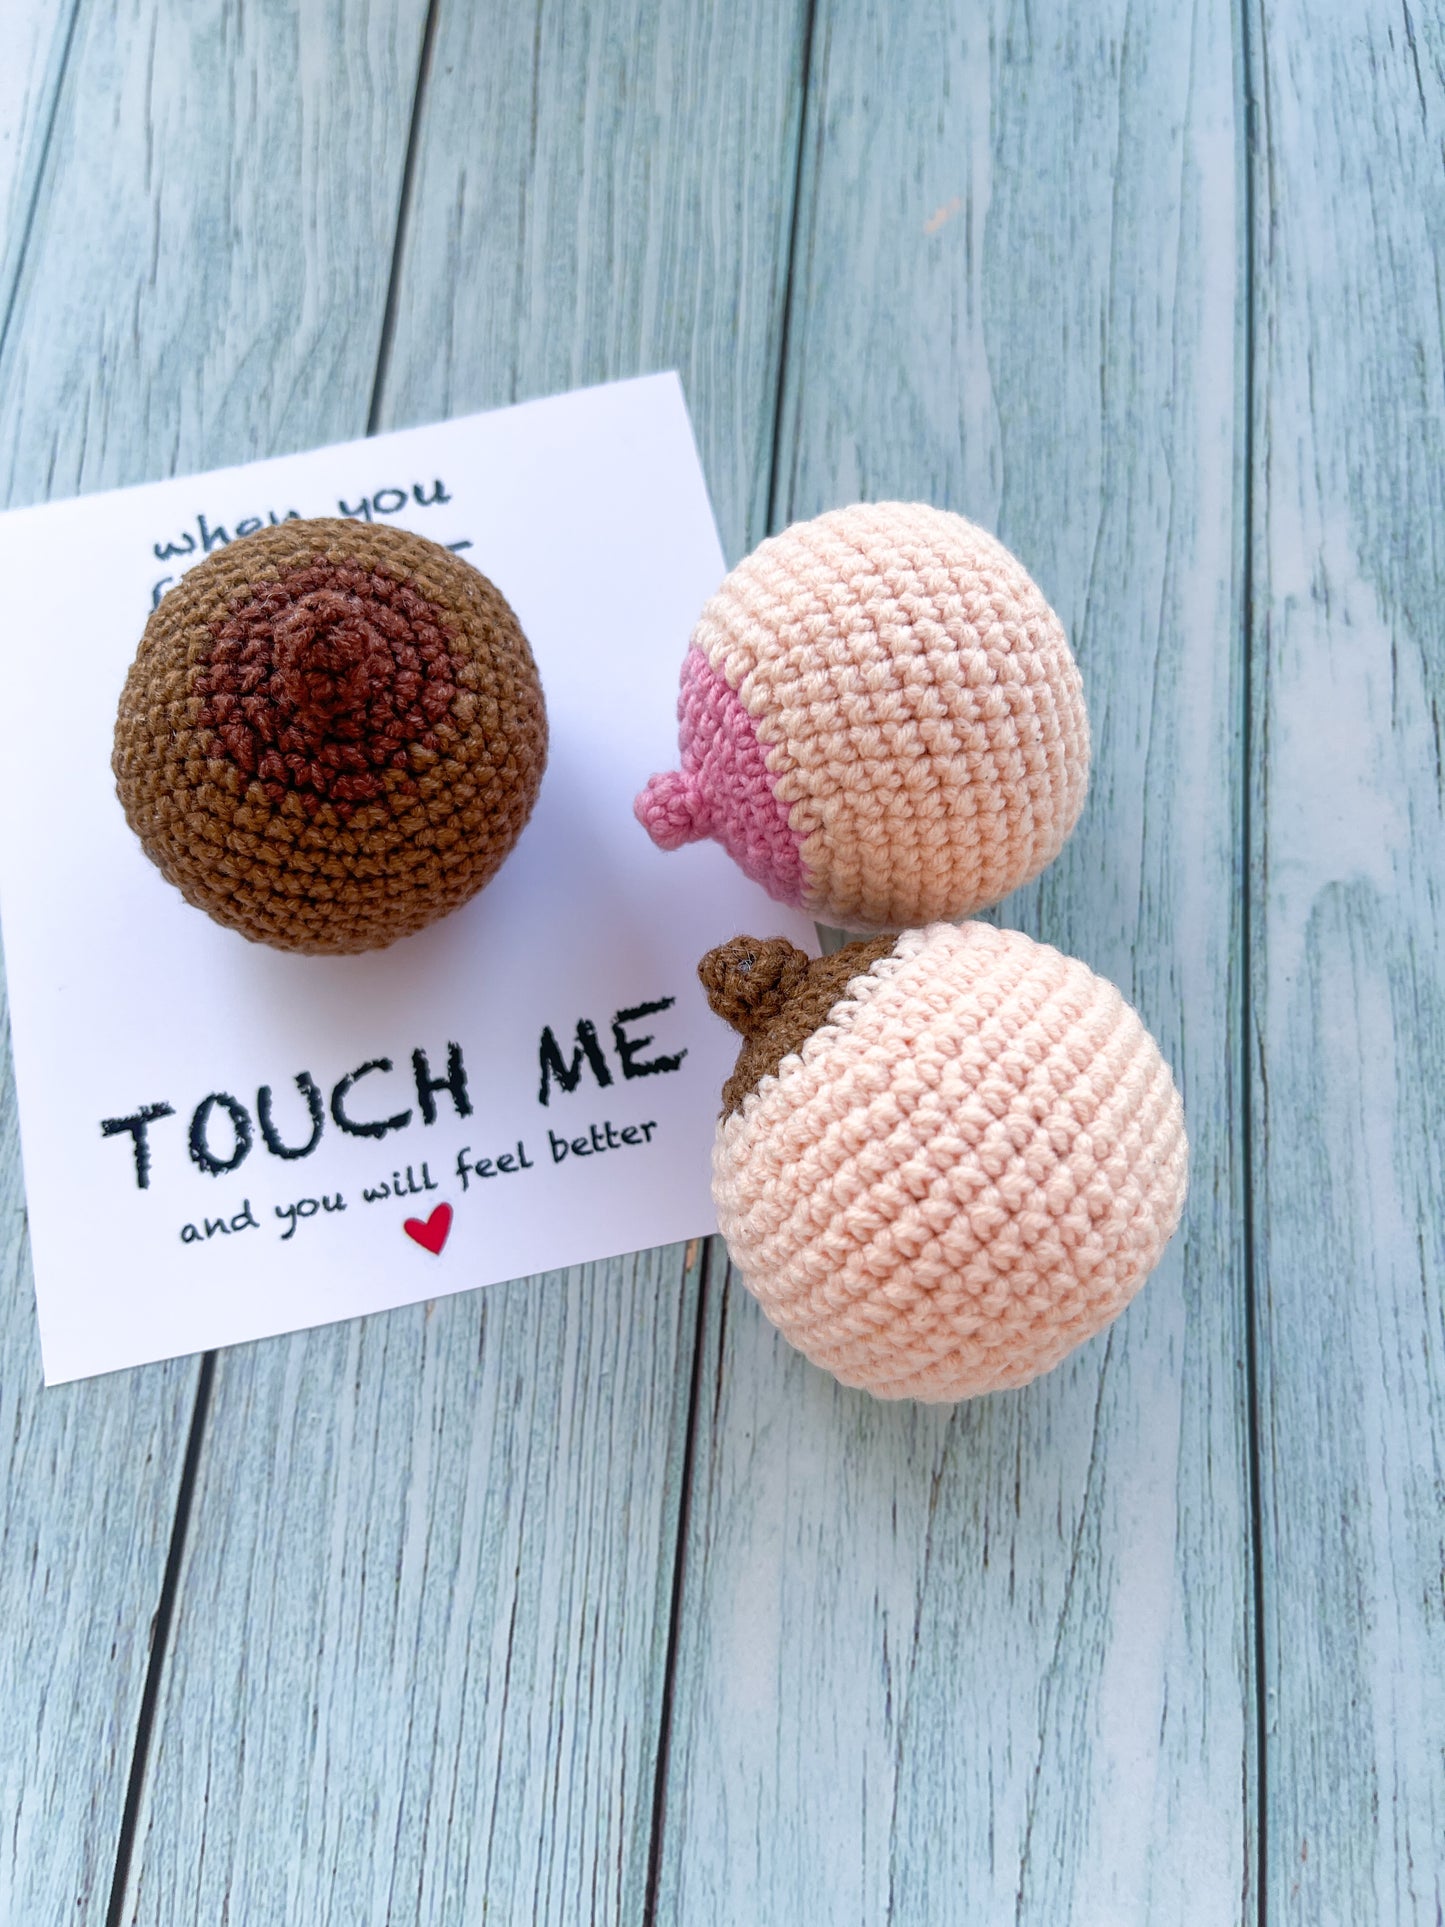 Touch me tits card | Breast Card| Funny card |Adult Friendship | Hand Sewn Felt Pocket Hug |Pick Me Up Gift |funny & sarcastic greeting card